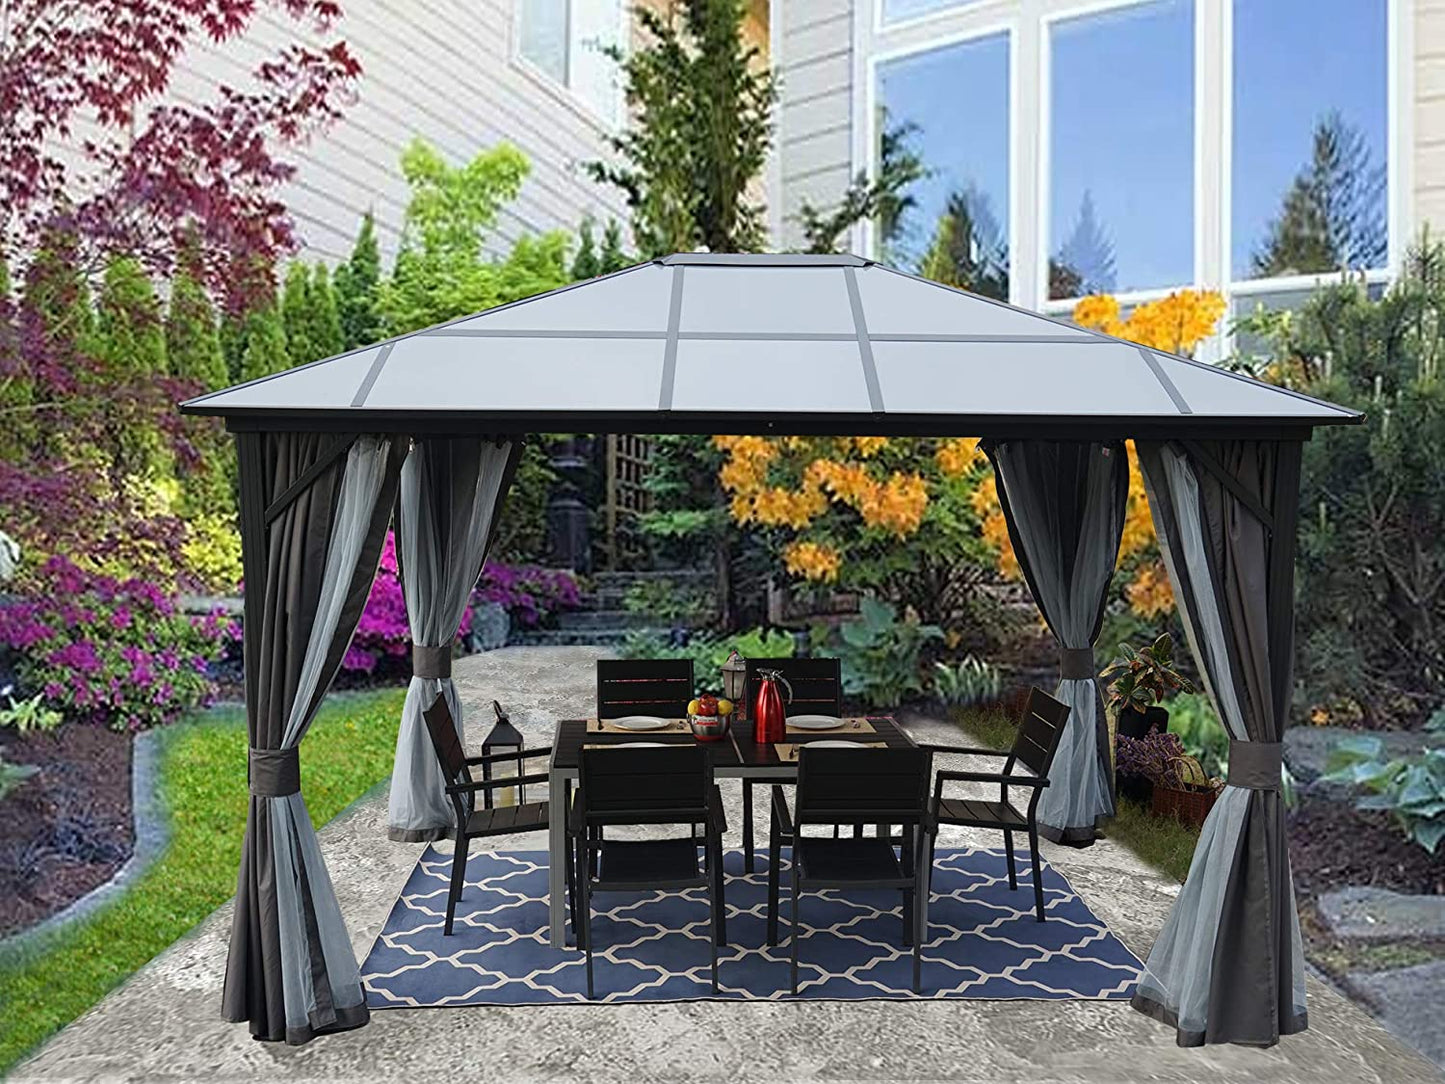 Kozyard 10ftx12ft' Polycarbonate Top Aluminum Permanent Gazebo with a Mosquito Net and Privacy Curtain